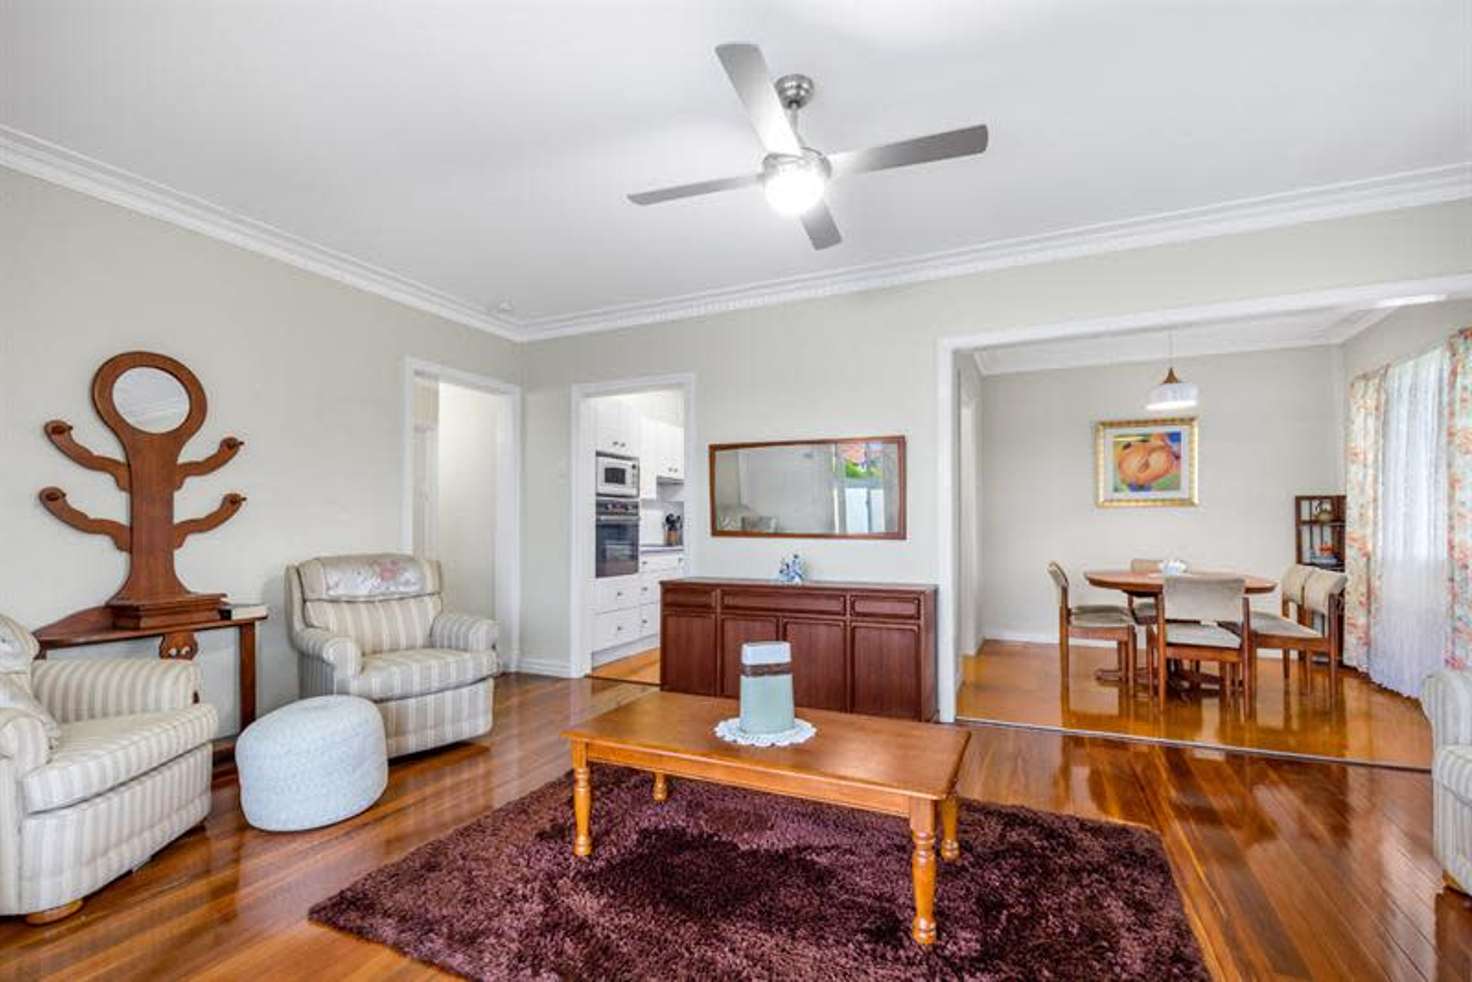 Main view of Homely house listing, 1 Toohey Rd, Tarragindi QLD 4121